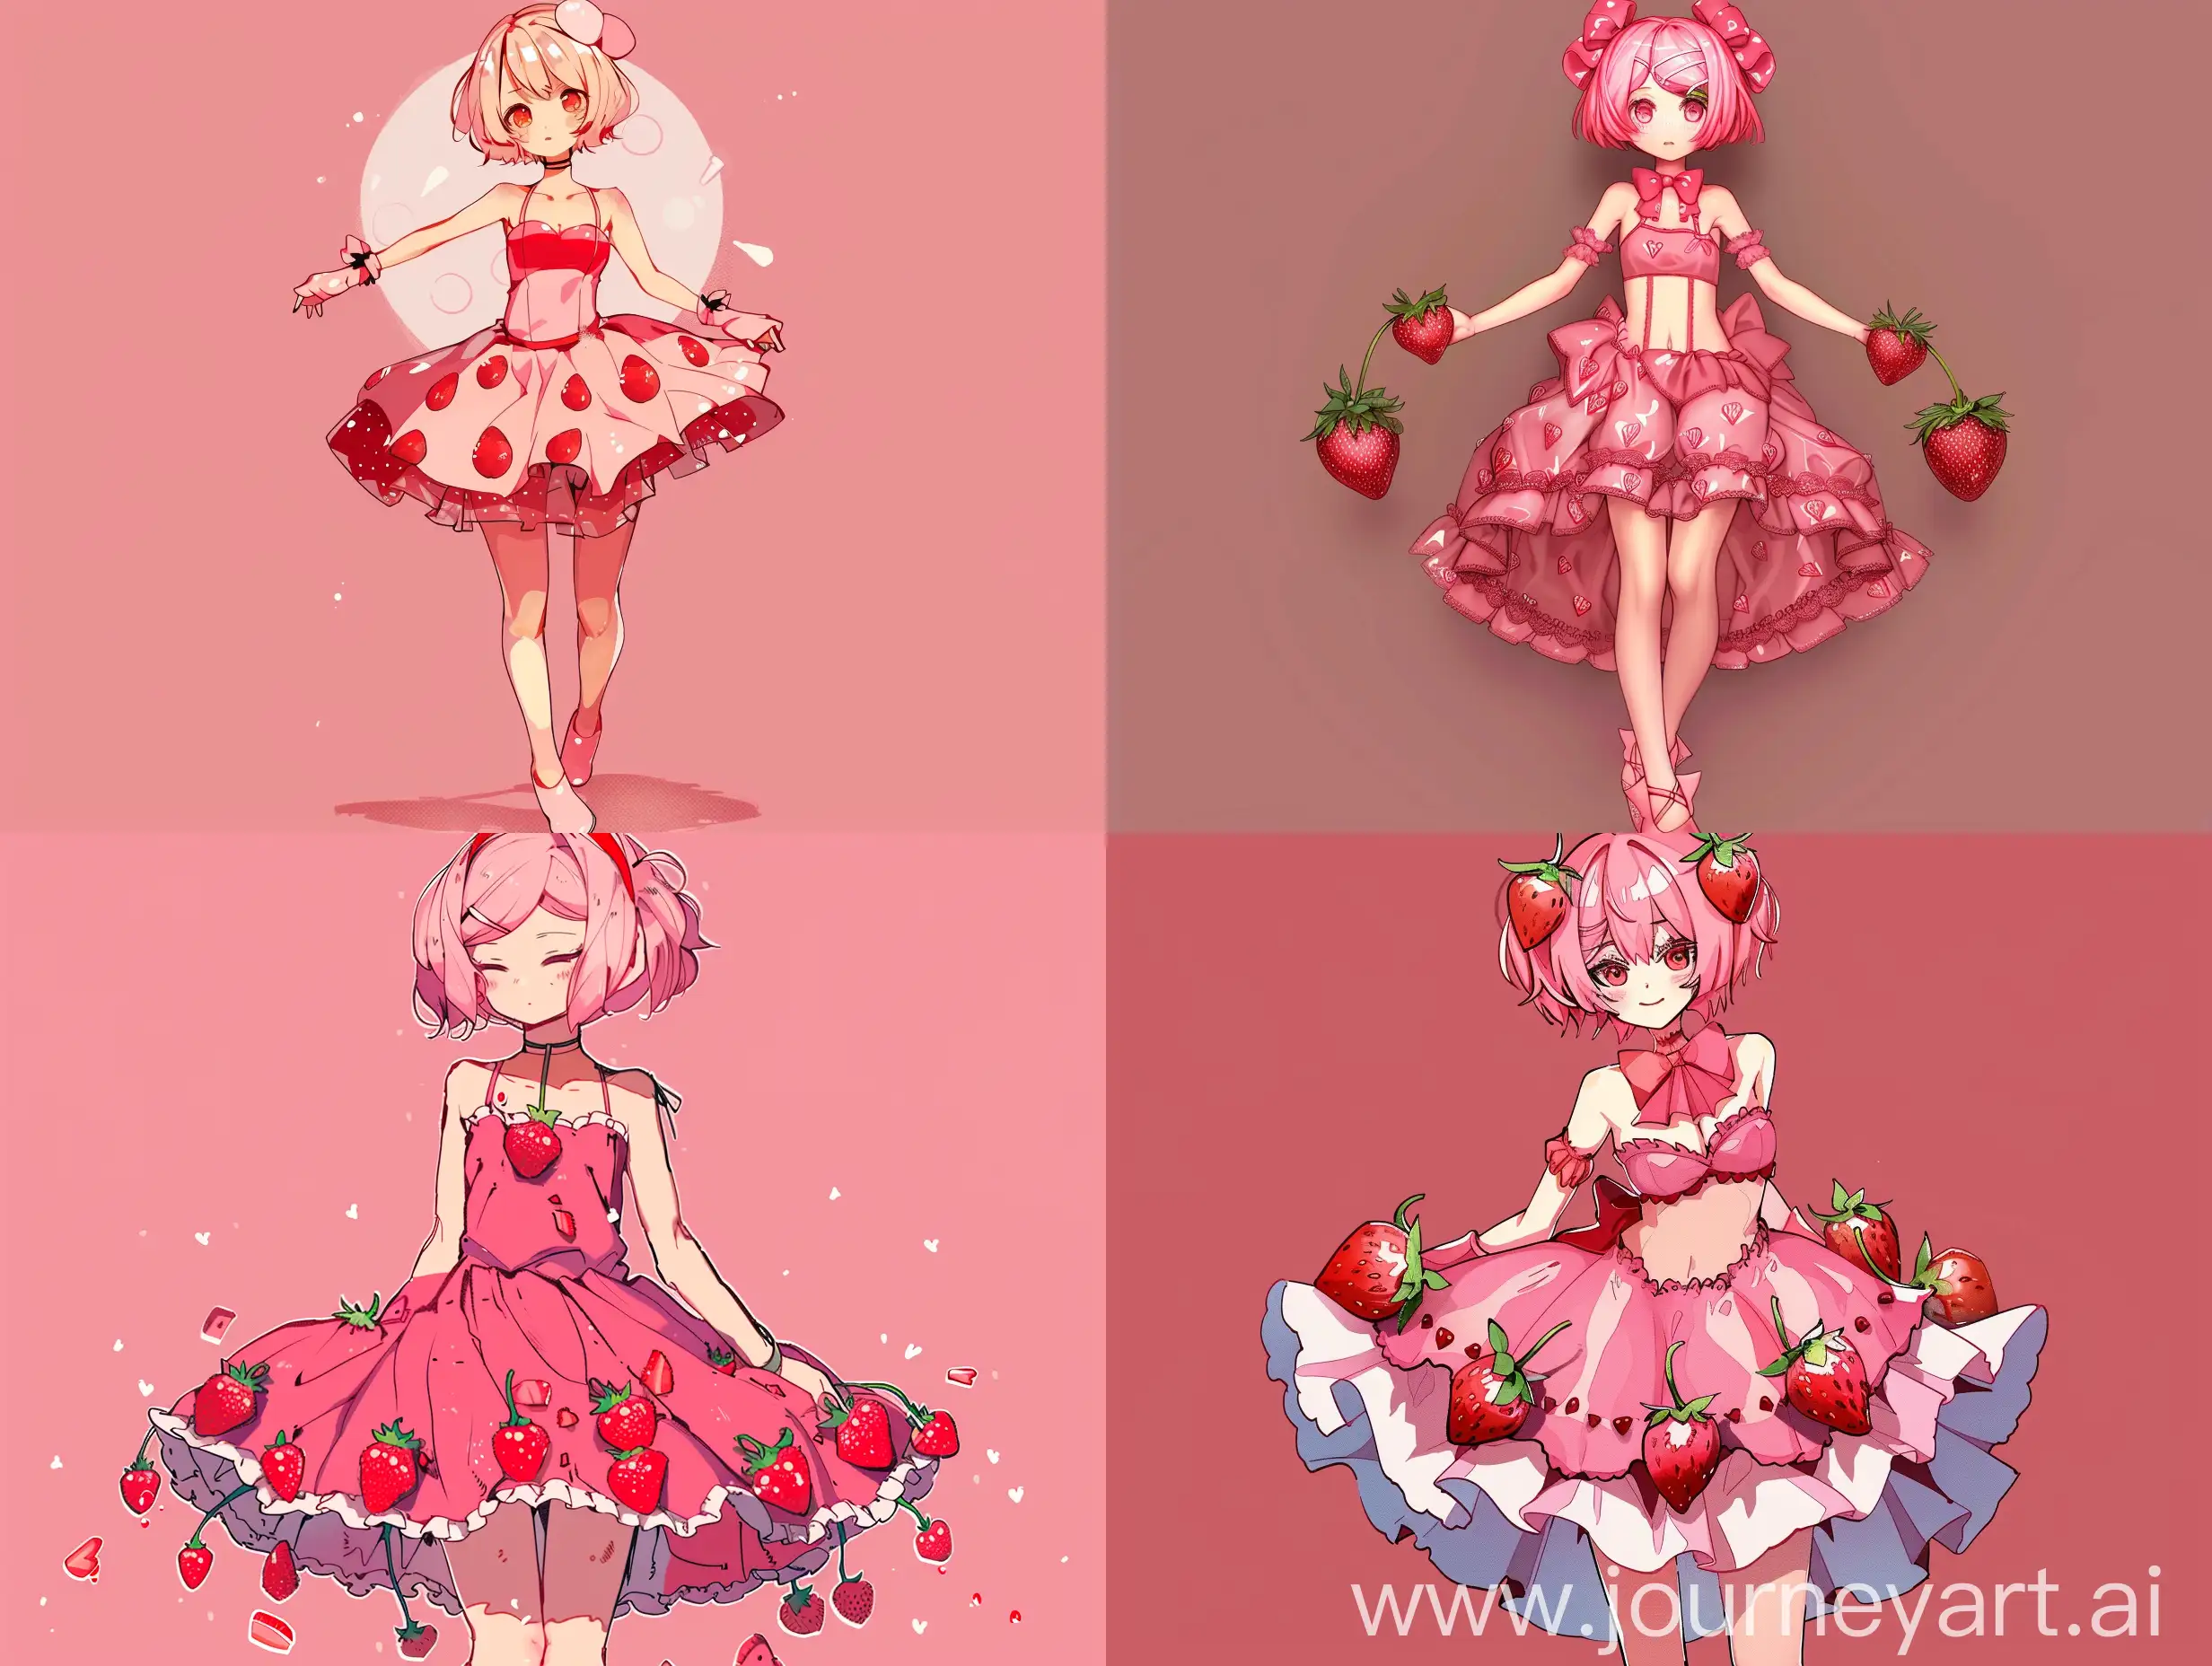 Pink aesthetic, rin kagamine, strawberry dress